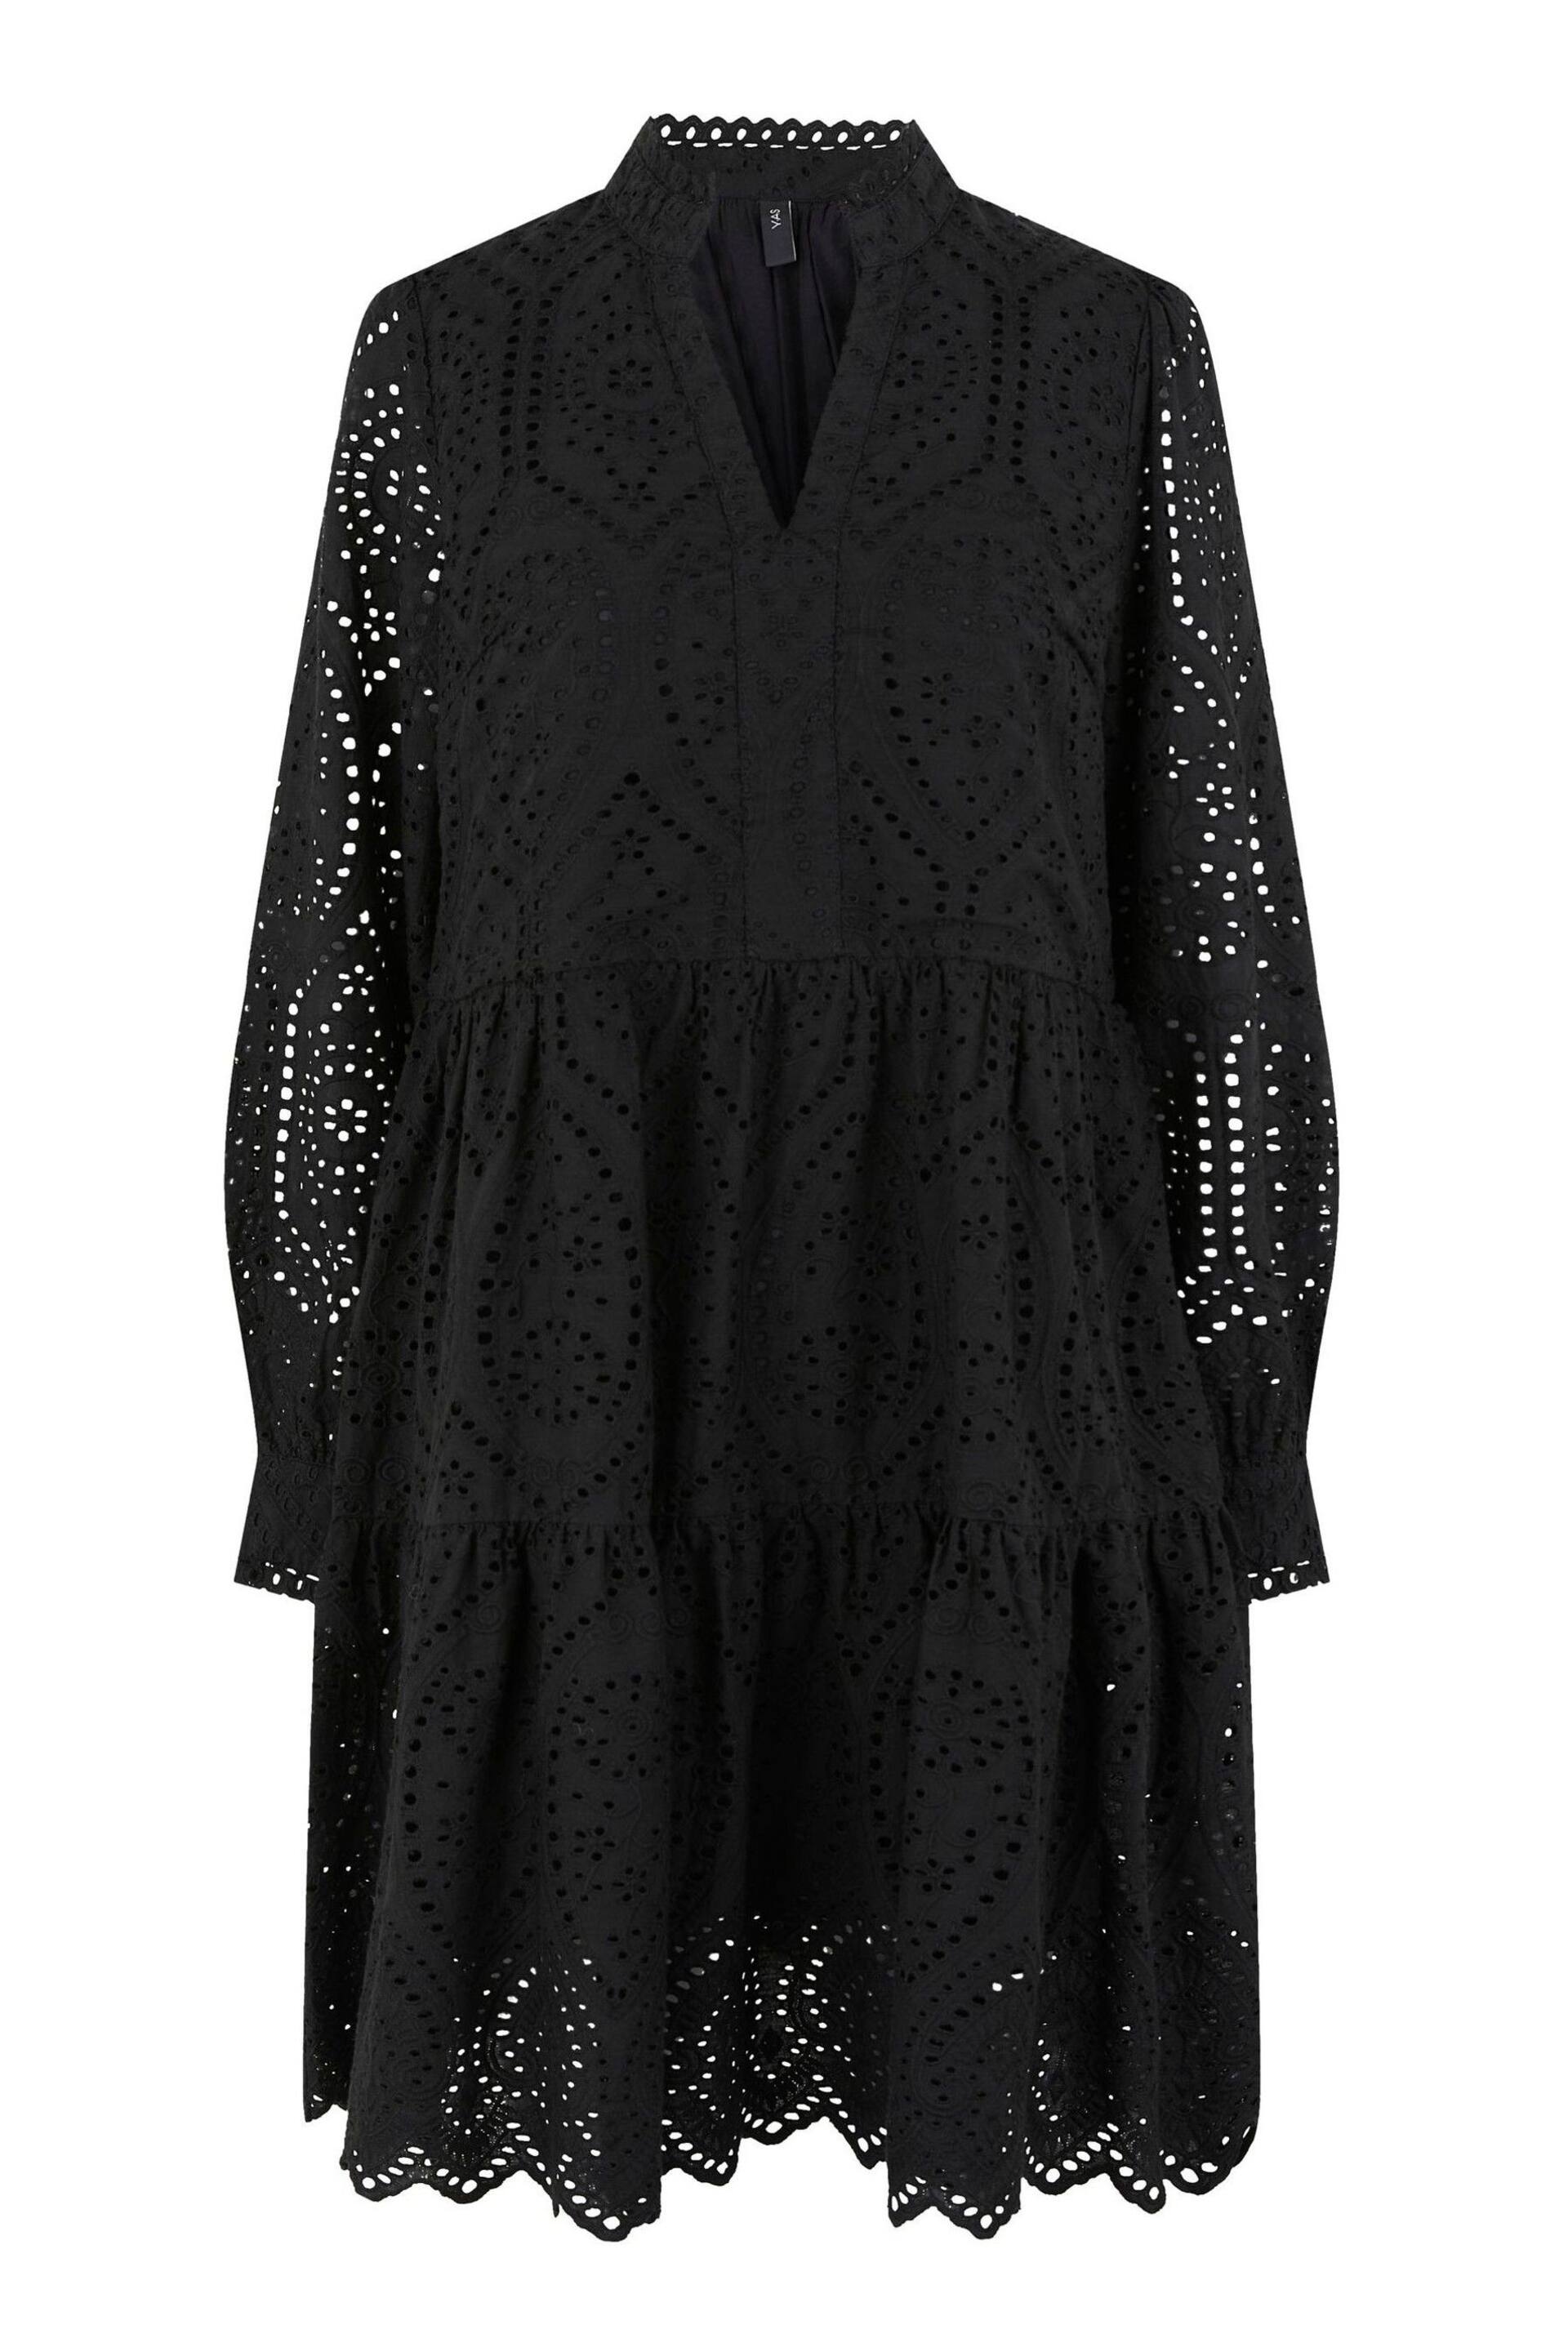 Y.A.S Black Broderie Long Sleeved Dress - Image 5 of 5